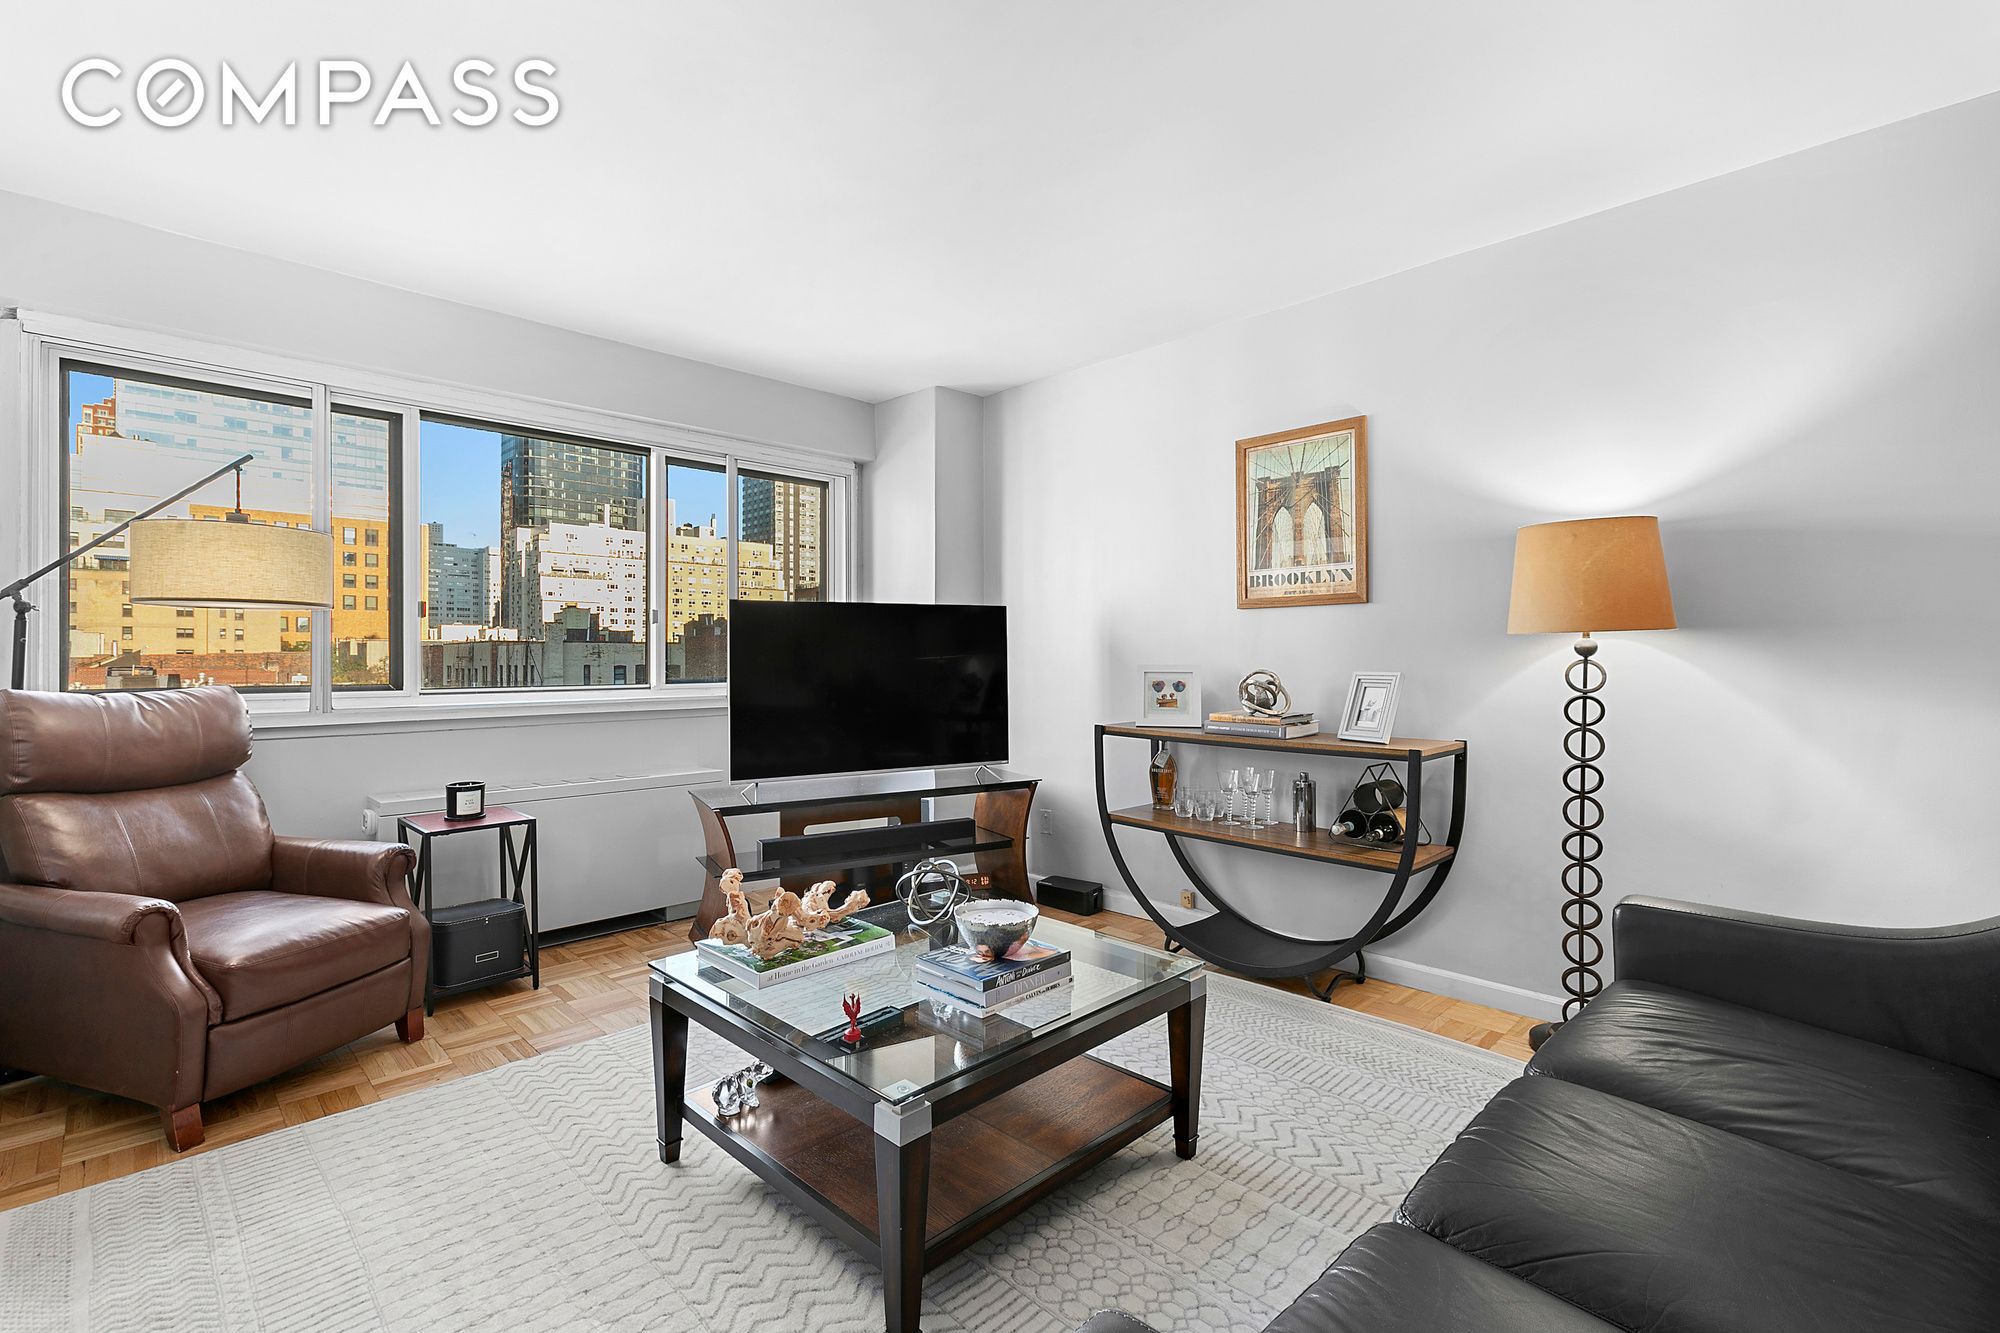 401 East 65th Street 8E, Upper East Side, Upper East Side, NYC - 1 Bedrooms  
1 Bathrooms  
3 Rooms - 